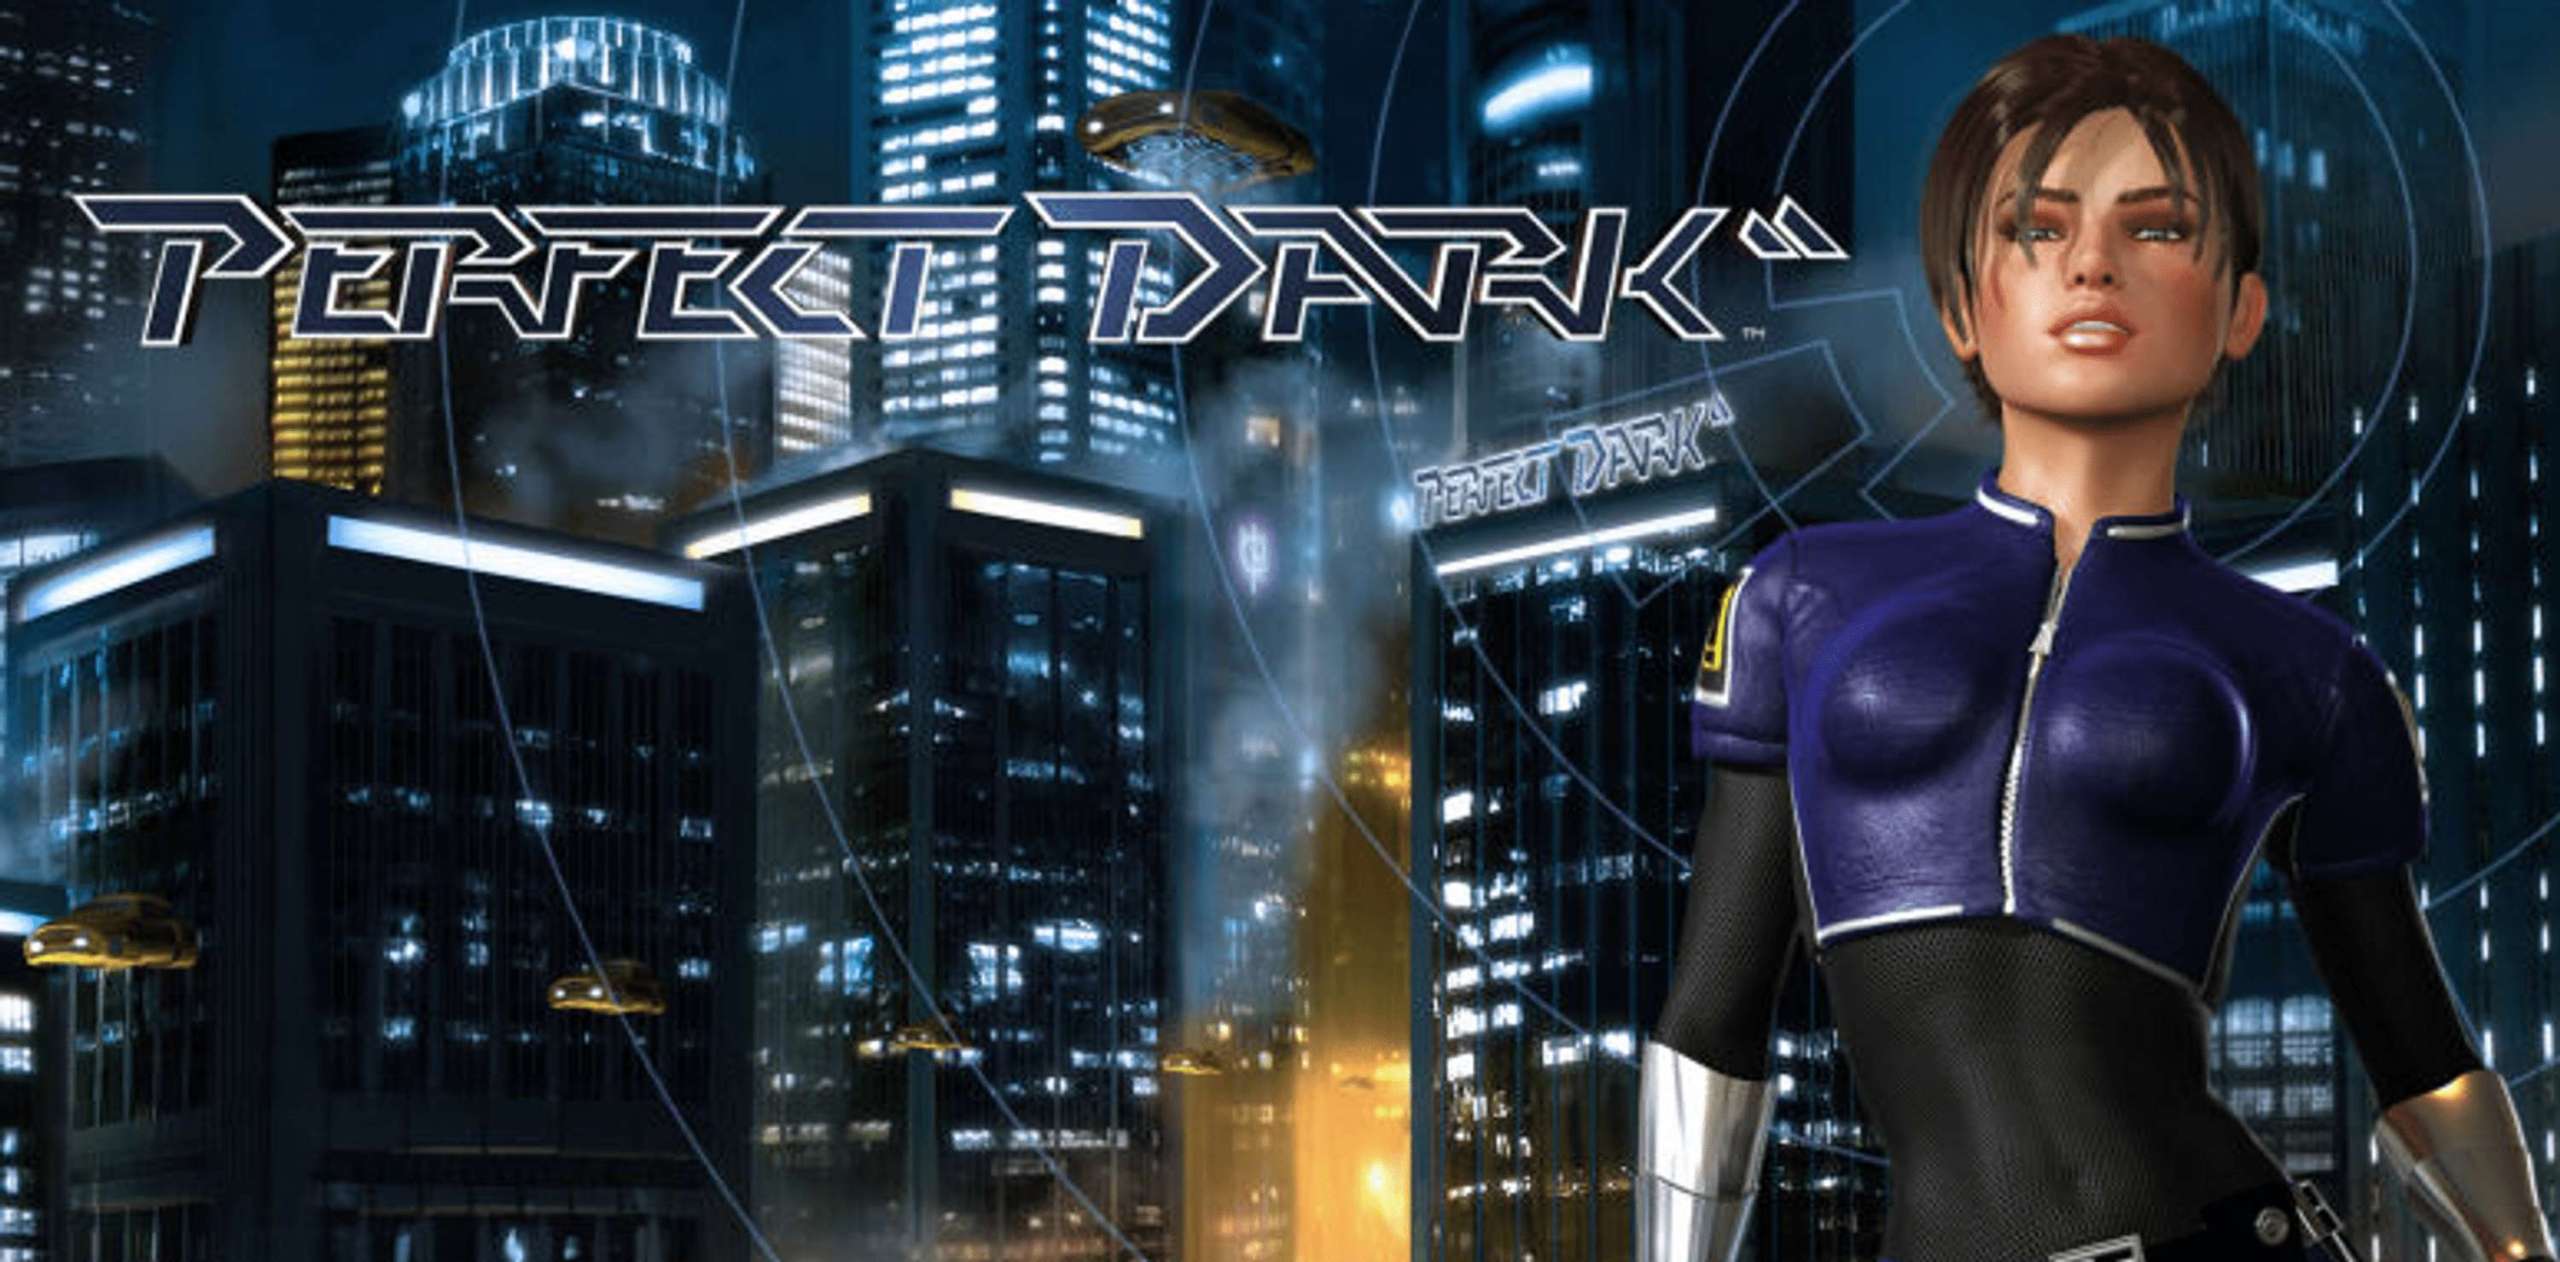 Perfect Dark’s Production Is Doing Nicely, According To Jez Corden